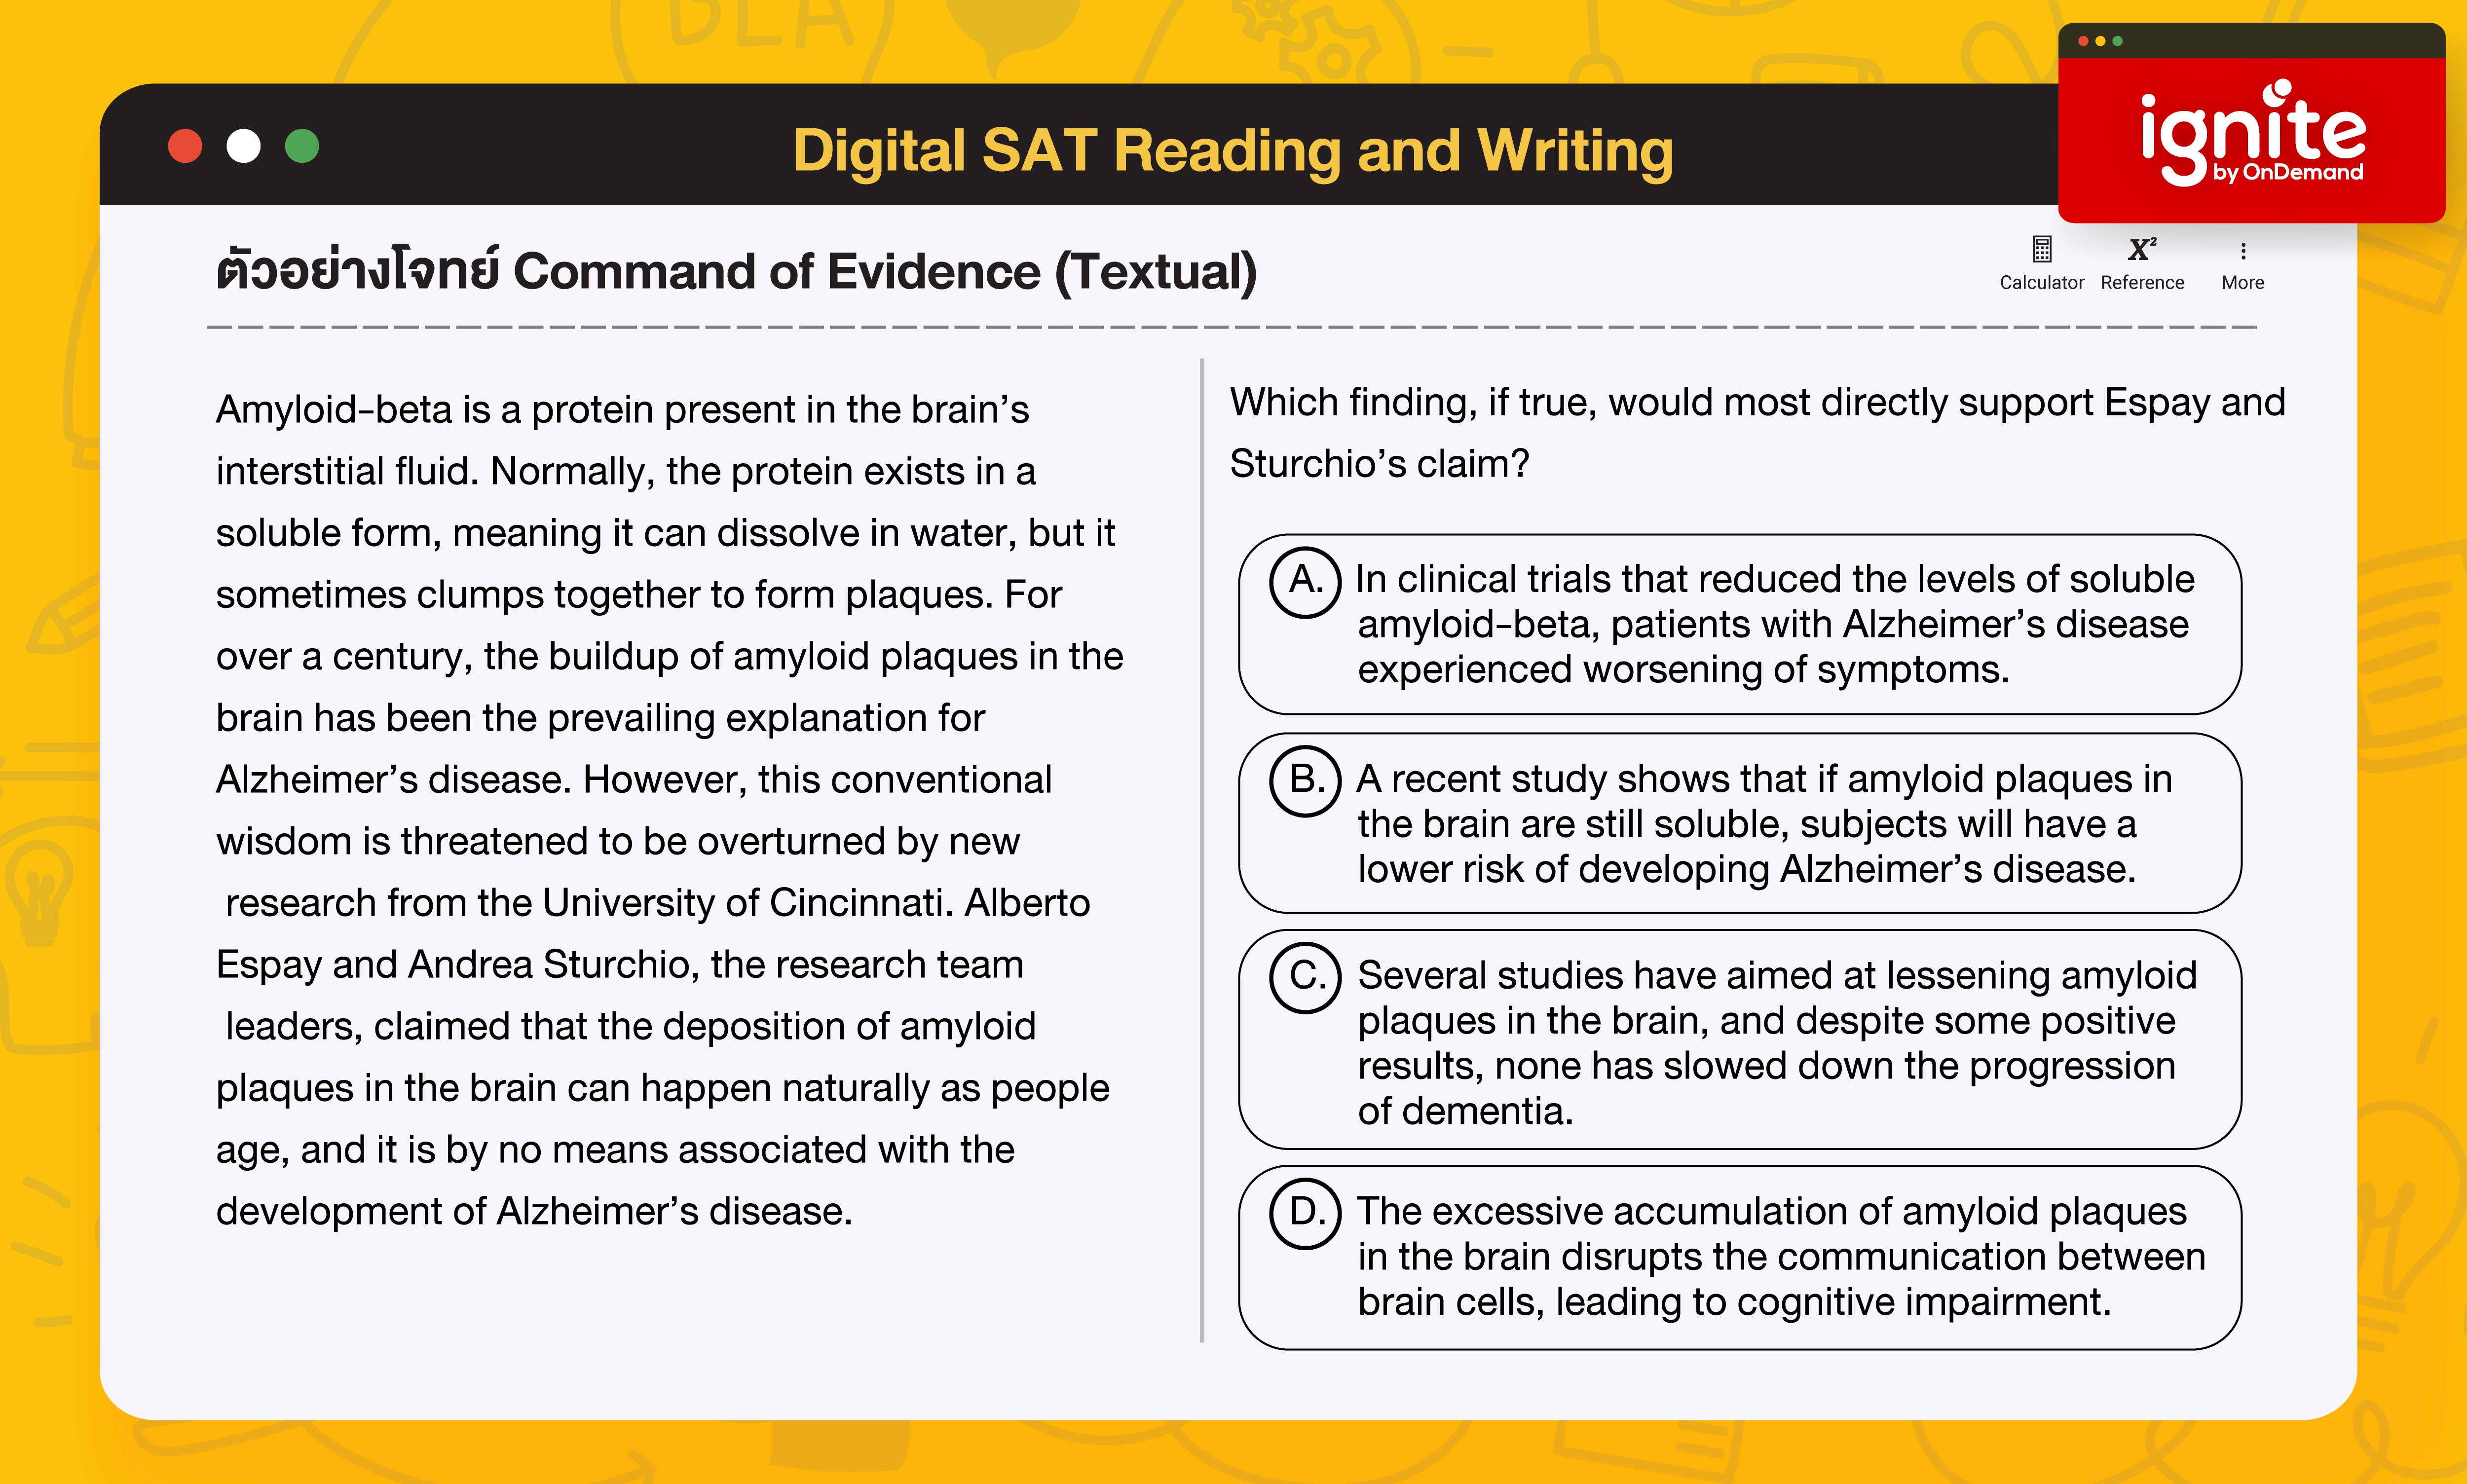 Command of Evidence - Digital SAT Reading and Wrting 2023 - ignite by OnDemand